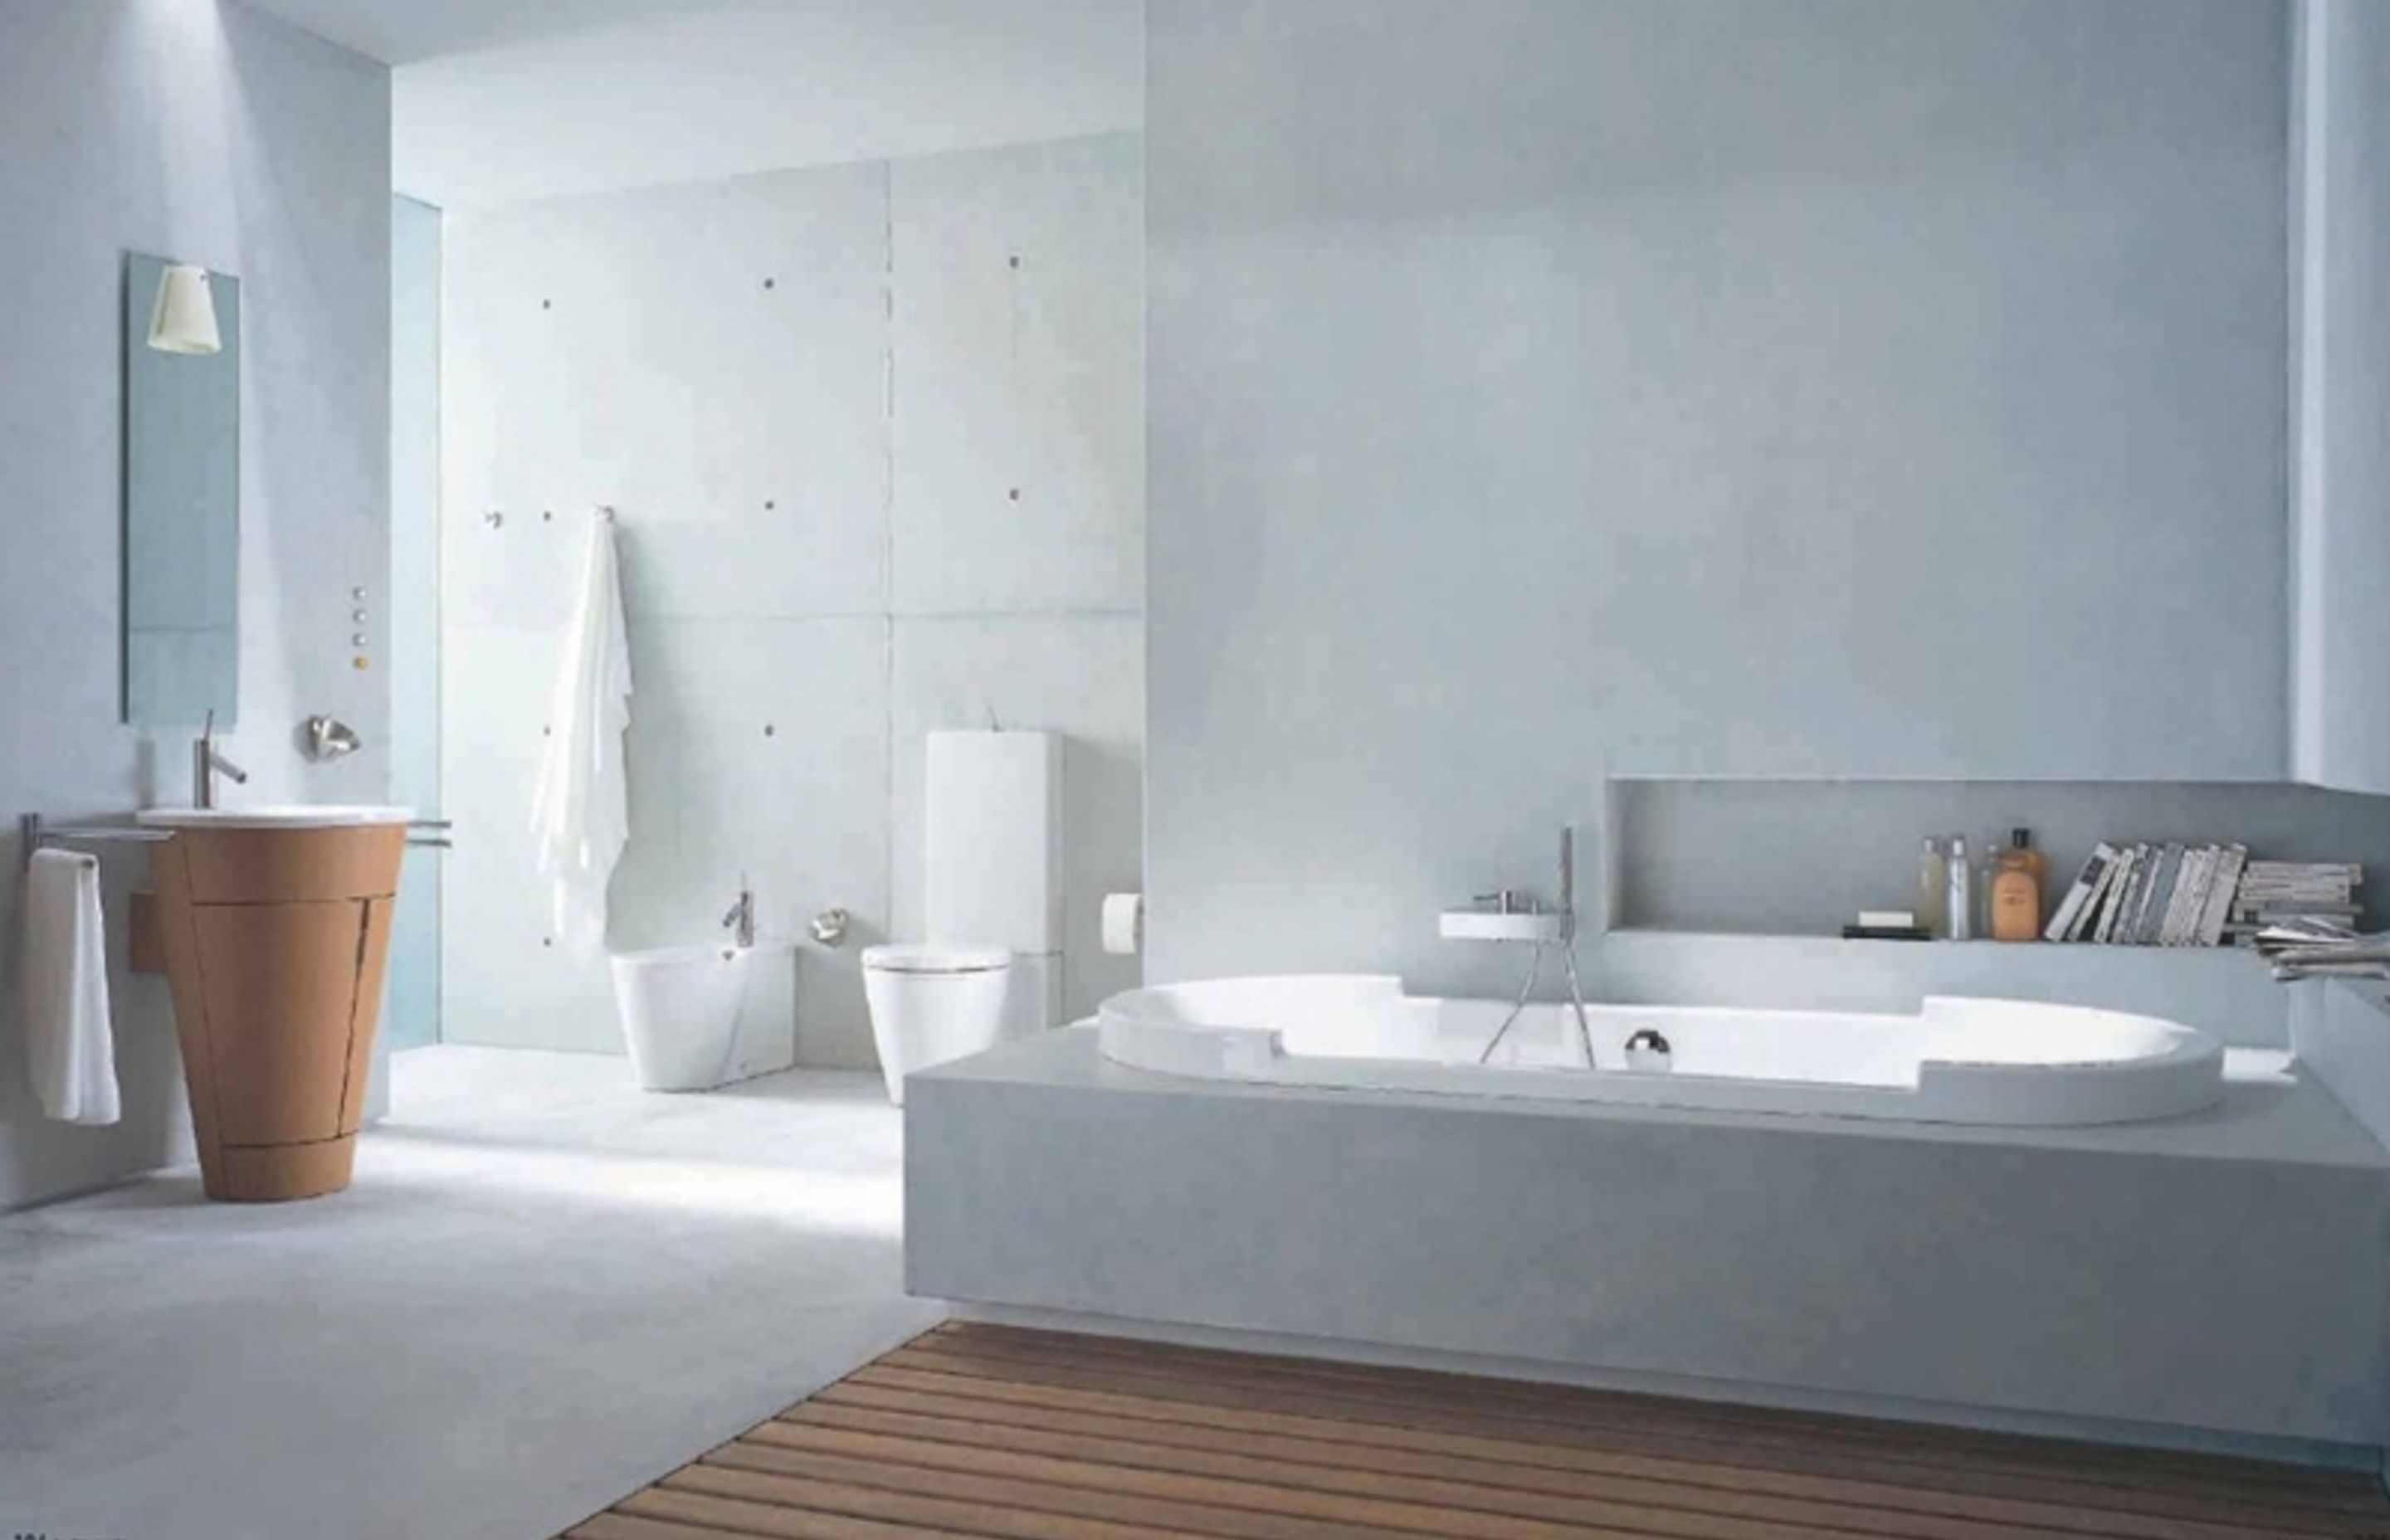 Adding a bookshelf by your bathtub is a customised decision that factors in your lifestyle.